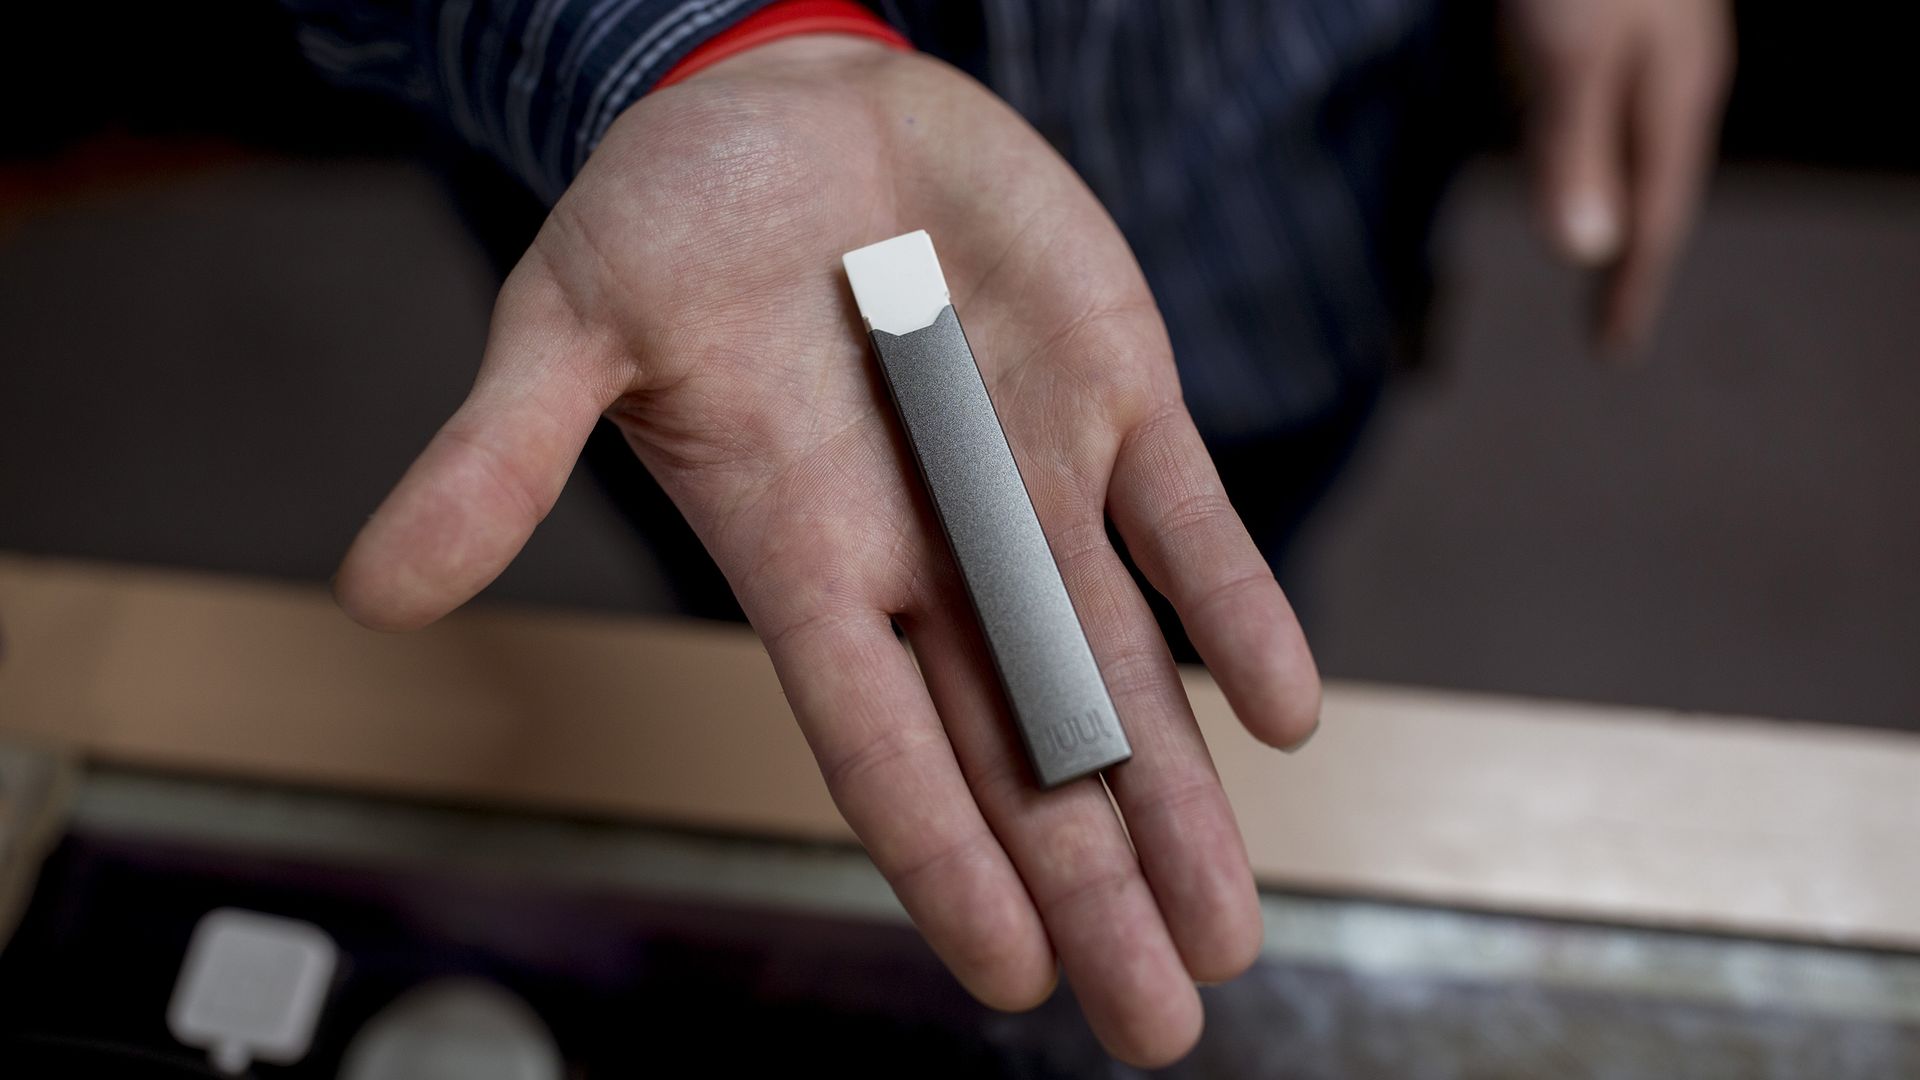 Palm of someone's hand holding a Juul e-cigarette